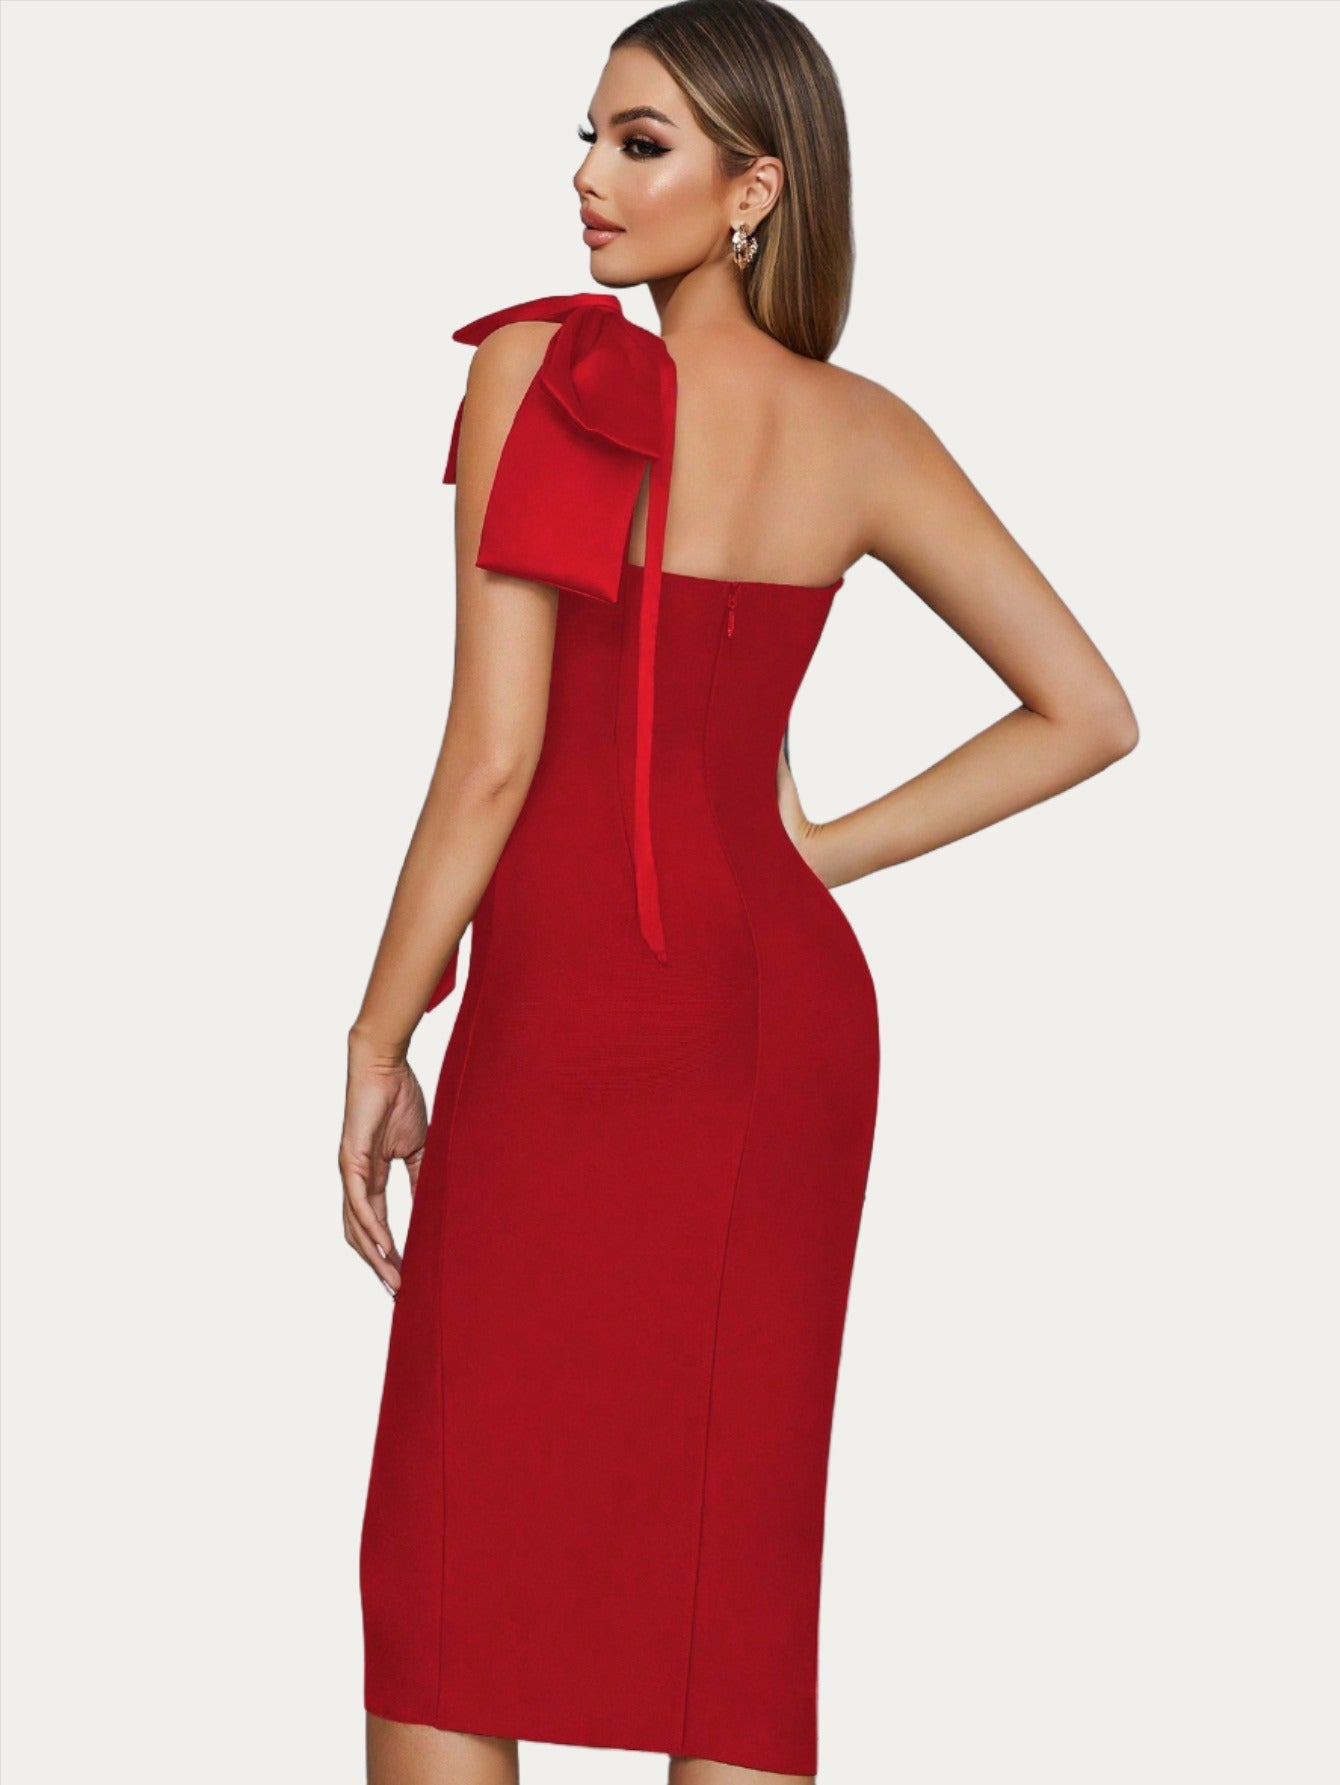 LLstyle One Shoulder Bandage Dress With Front Slit For Women